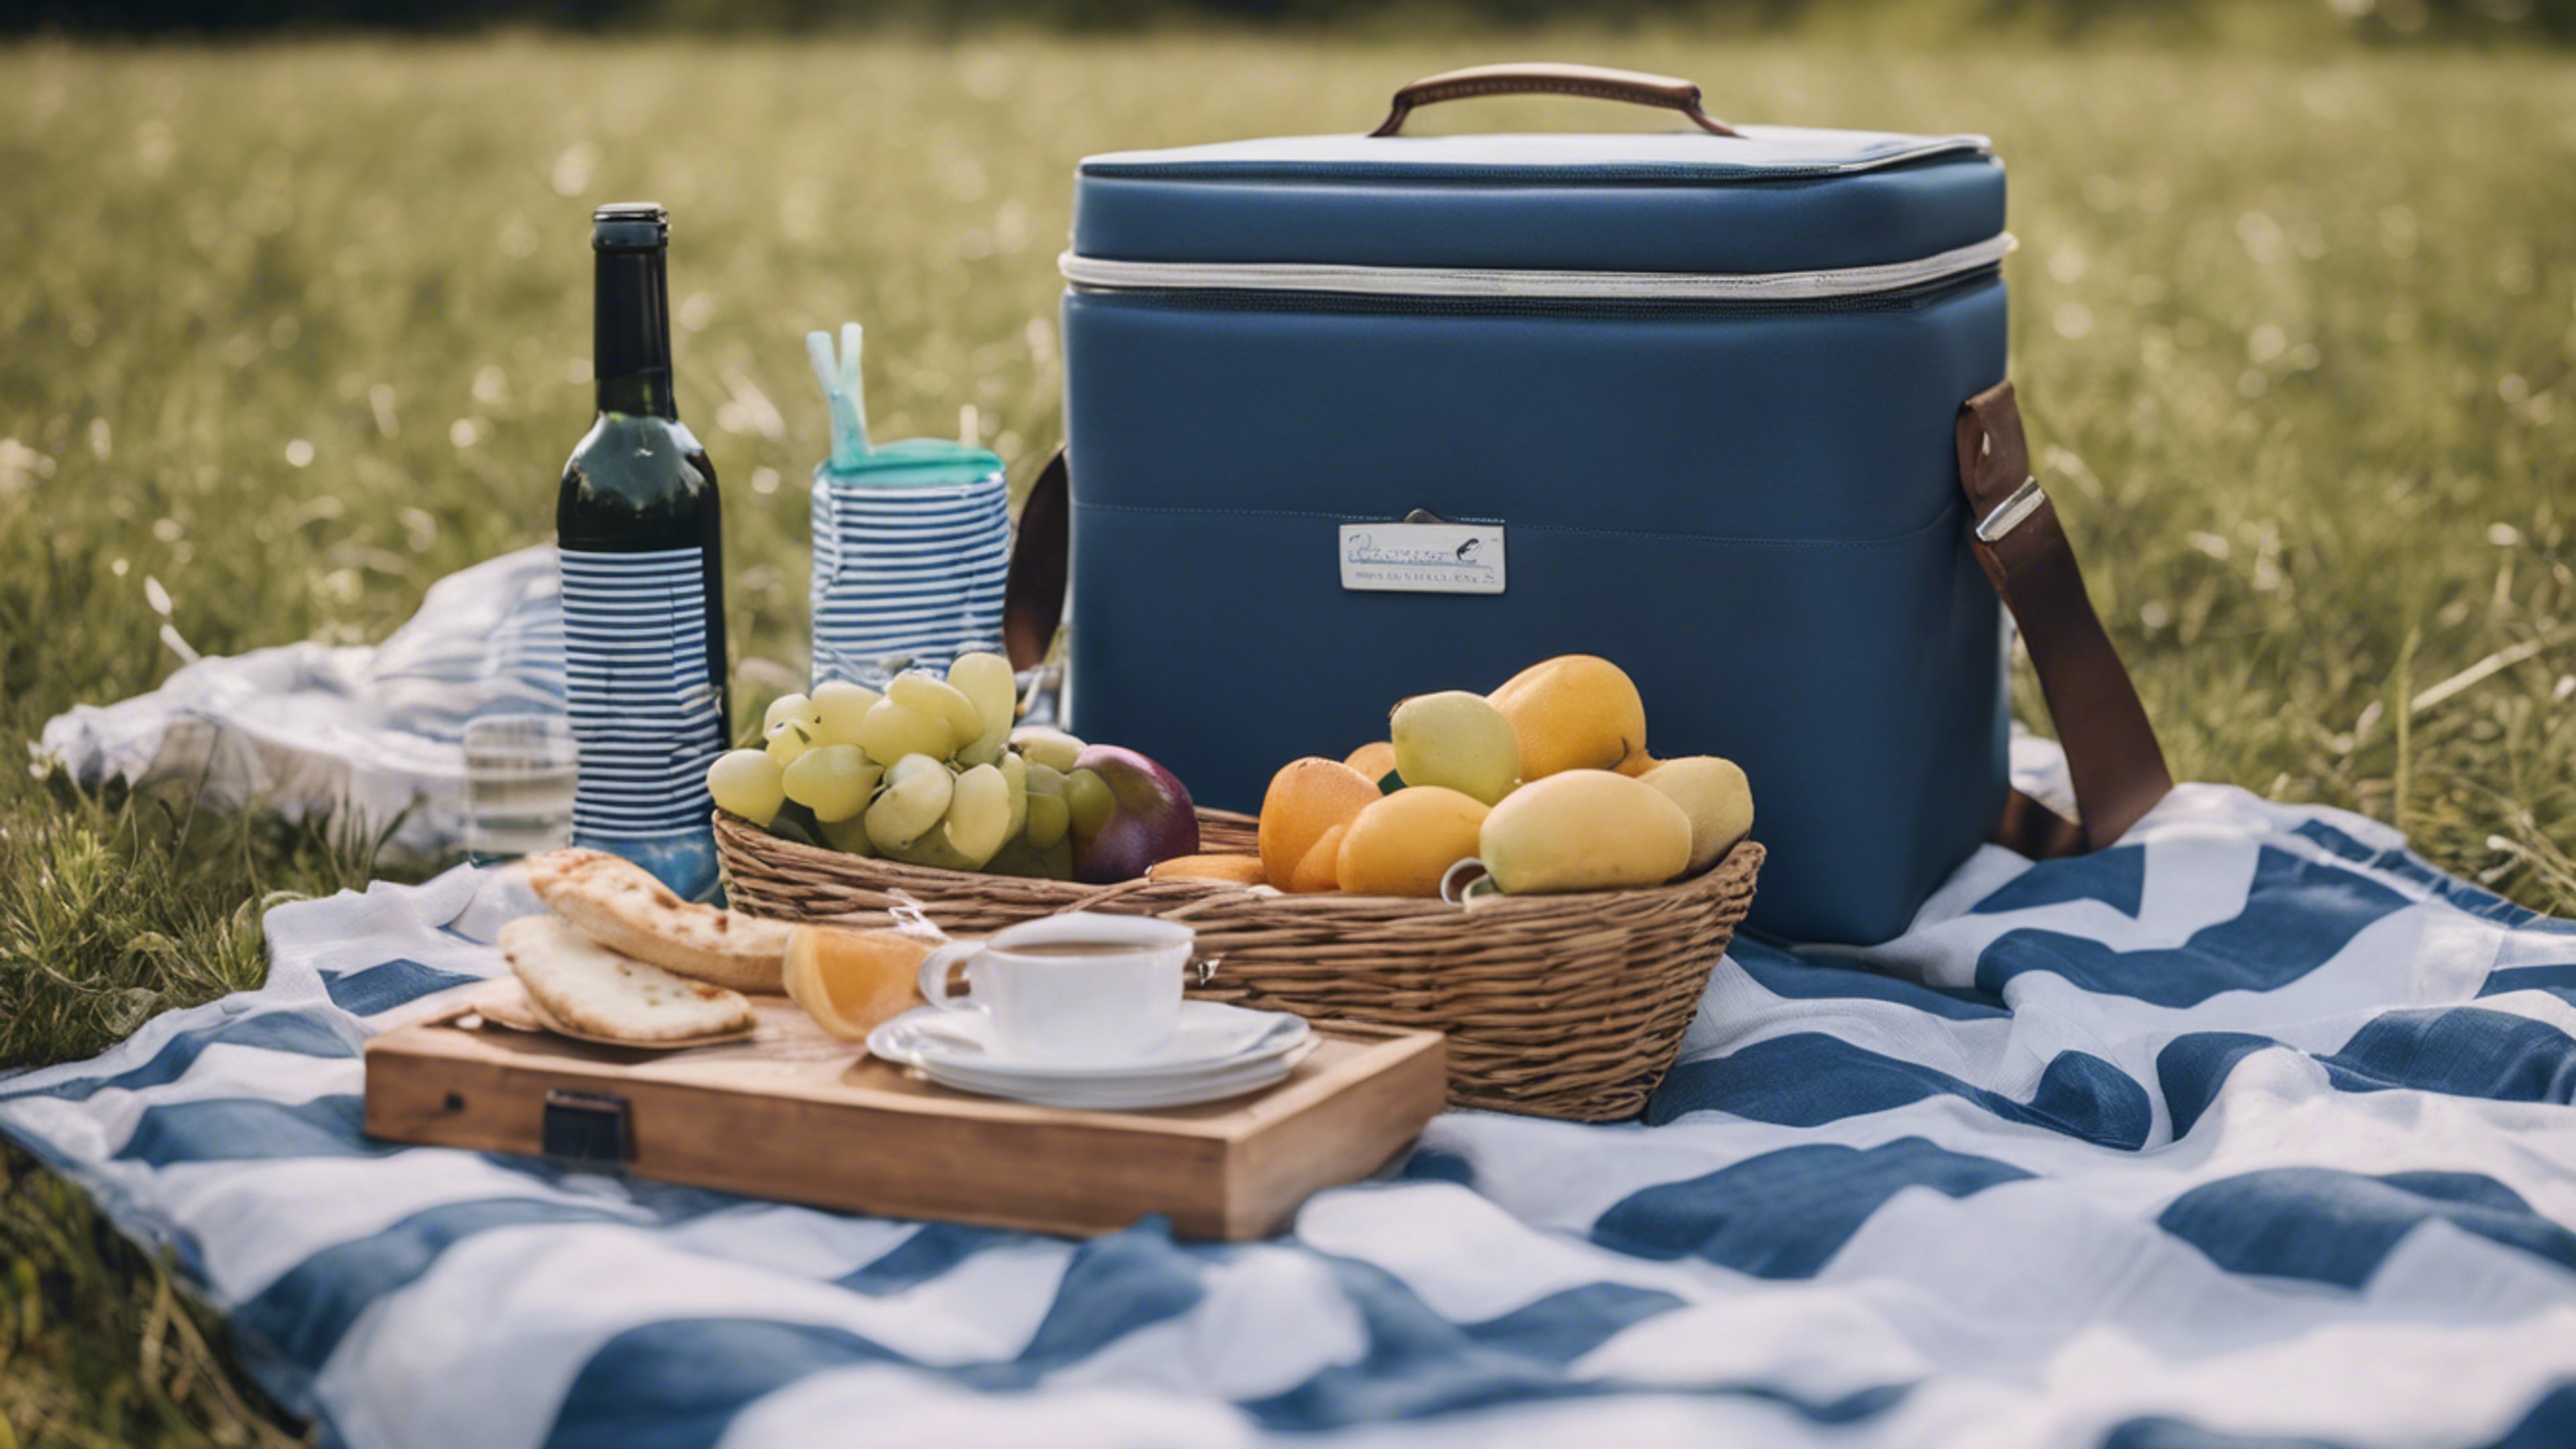 A preppy picnic setup in a grassy meadow, featuring a blue and white striped picnic blanket and matching cooler. Sfondo[2c3aa7a20c924d6f9450]